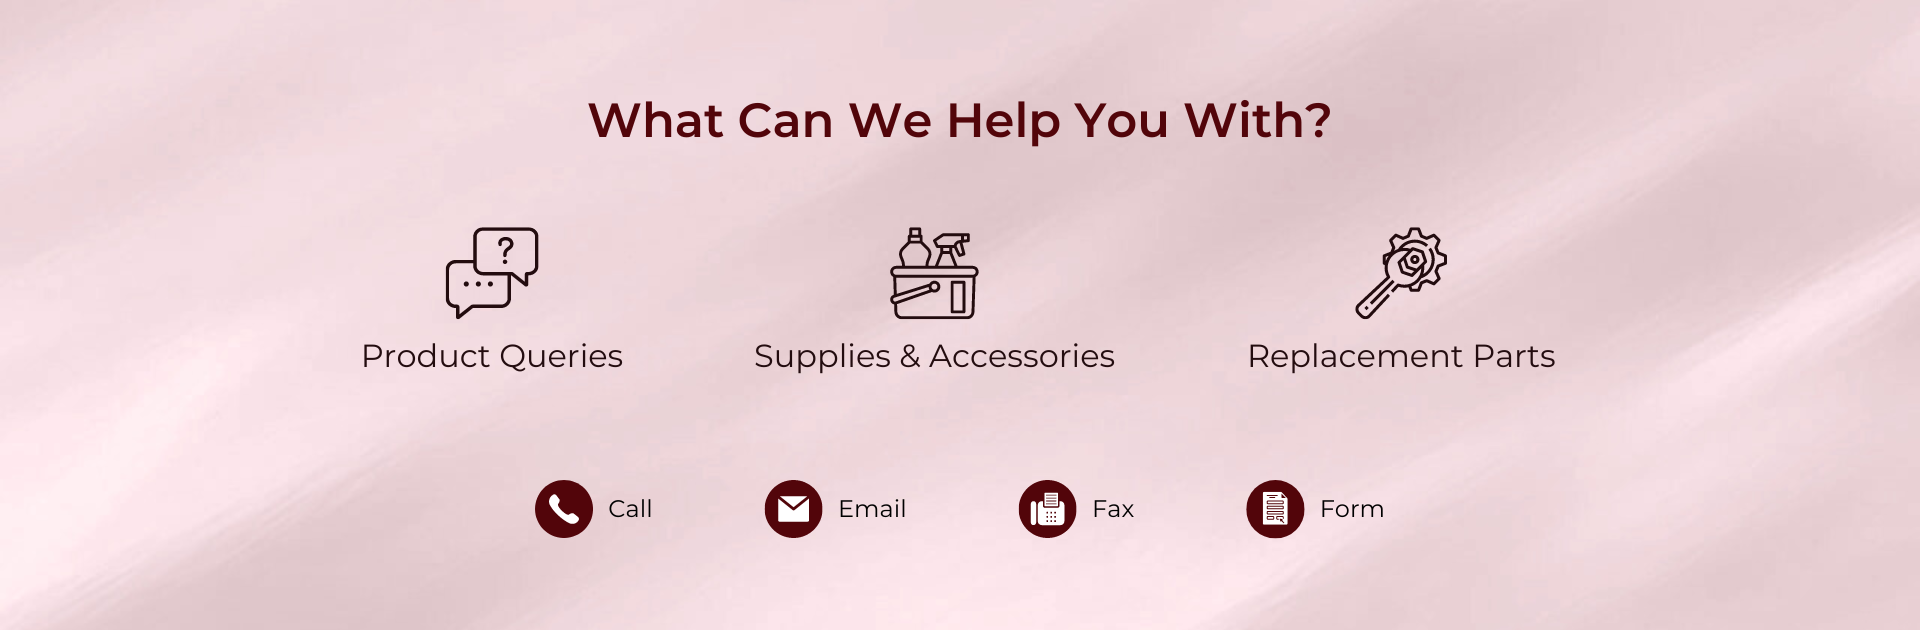 ACCO-GBC-Supplies-Accessories-Product-Queries-Replacement-Parts-Contact-Us-Desktop